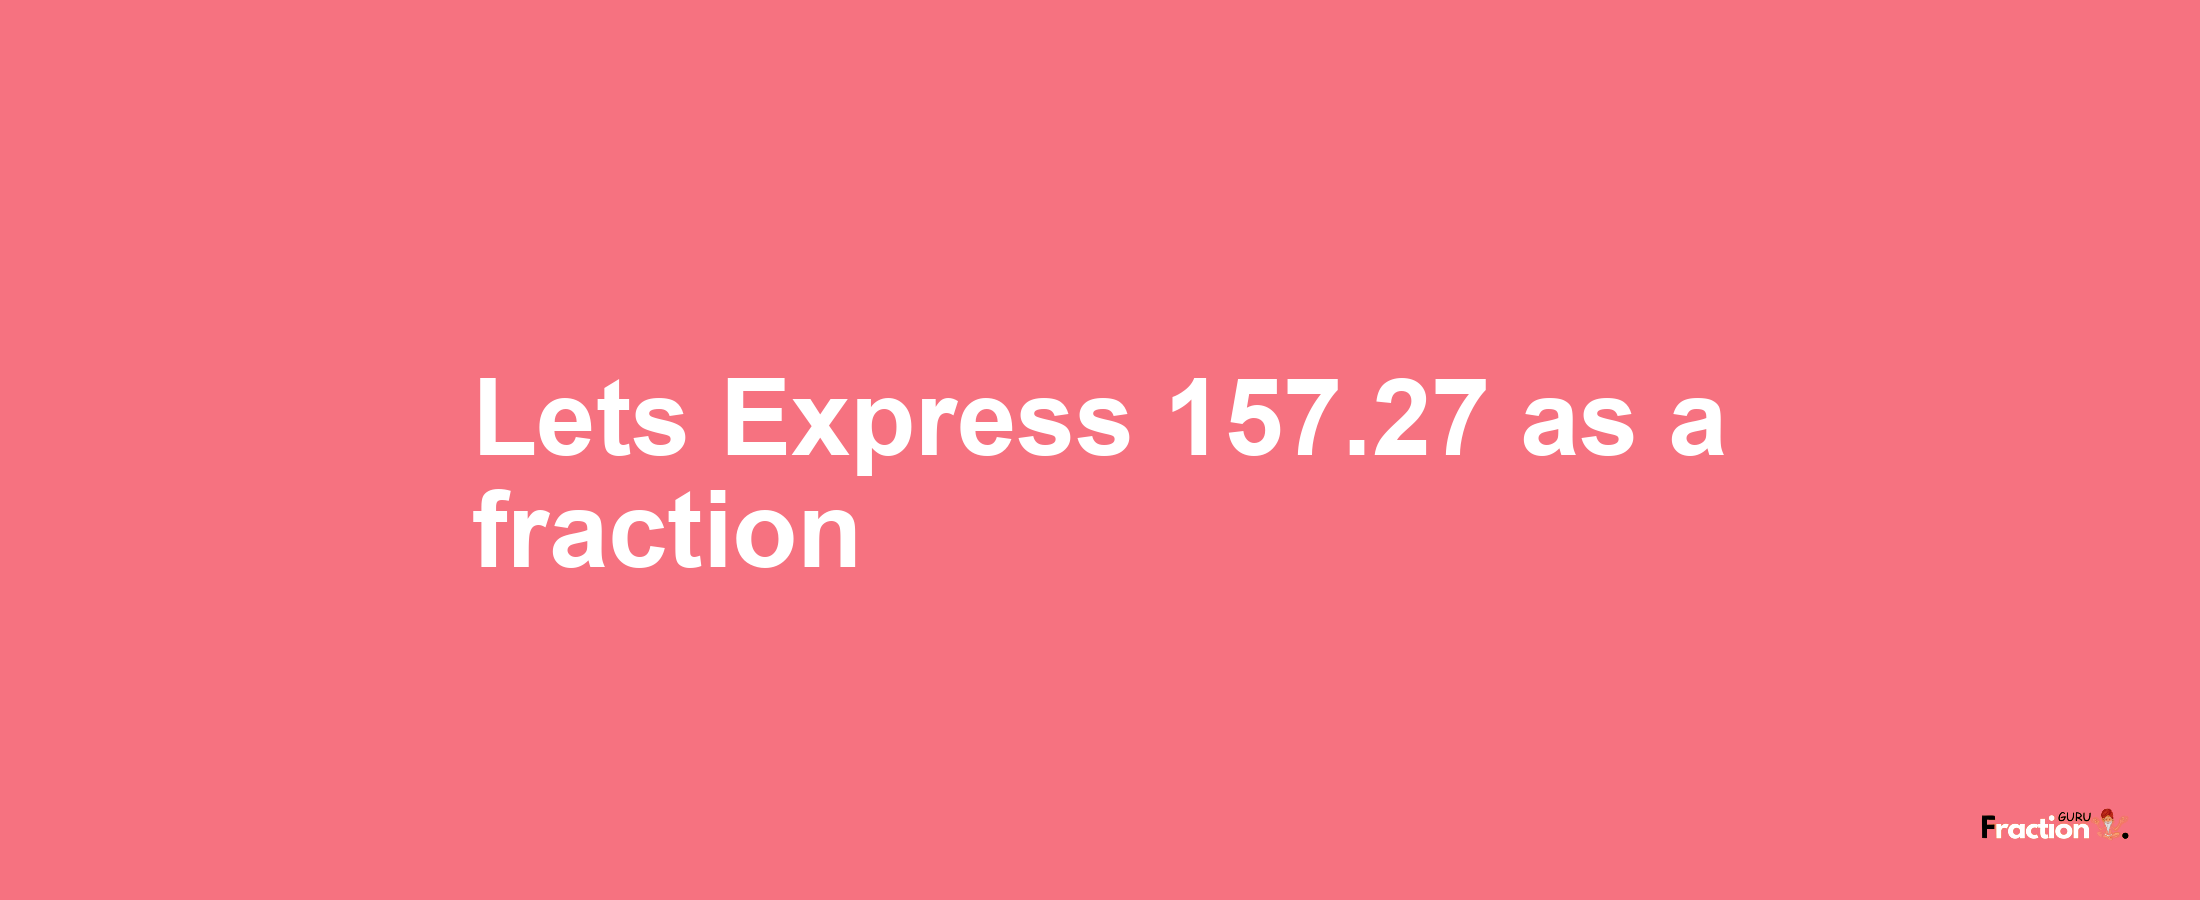 Lets Express 157.27 as afraction